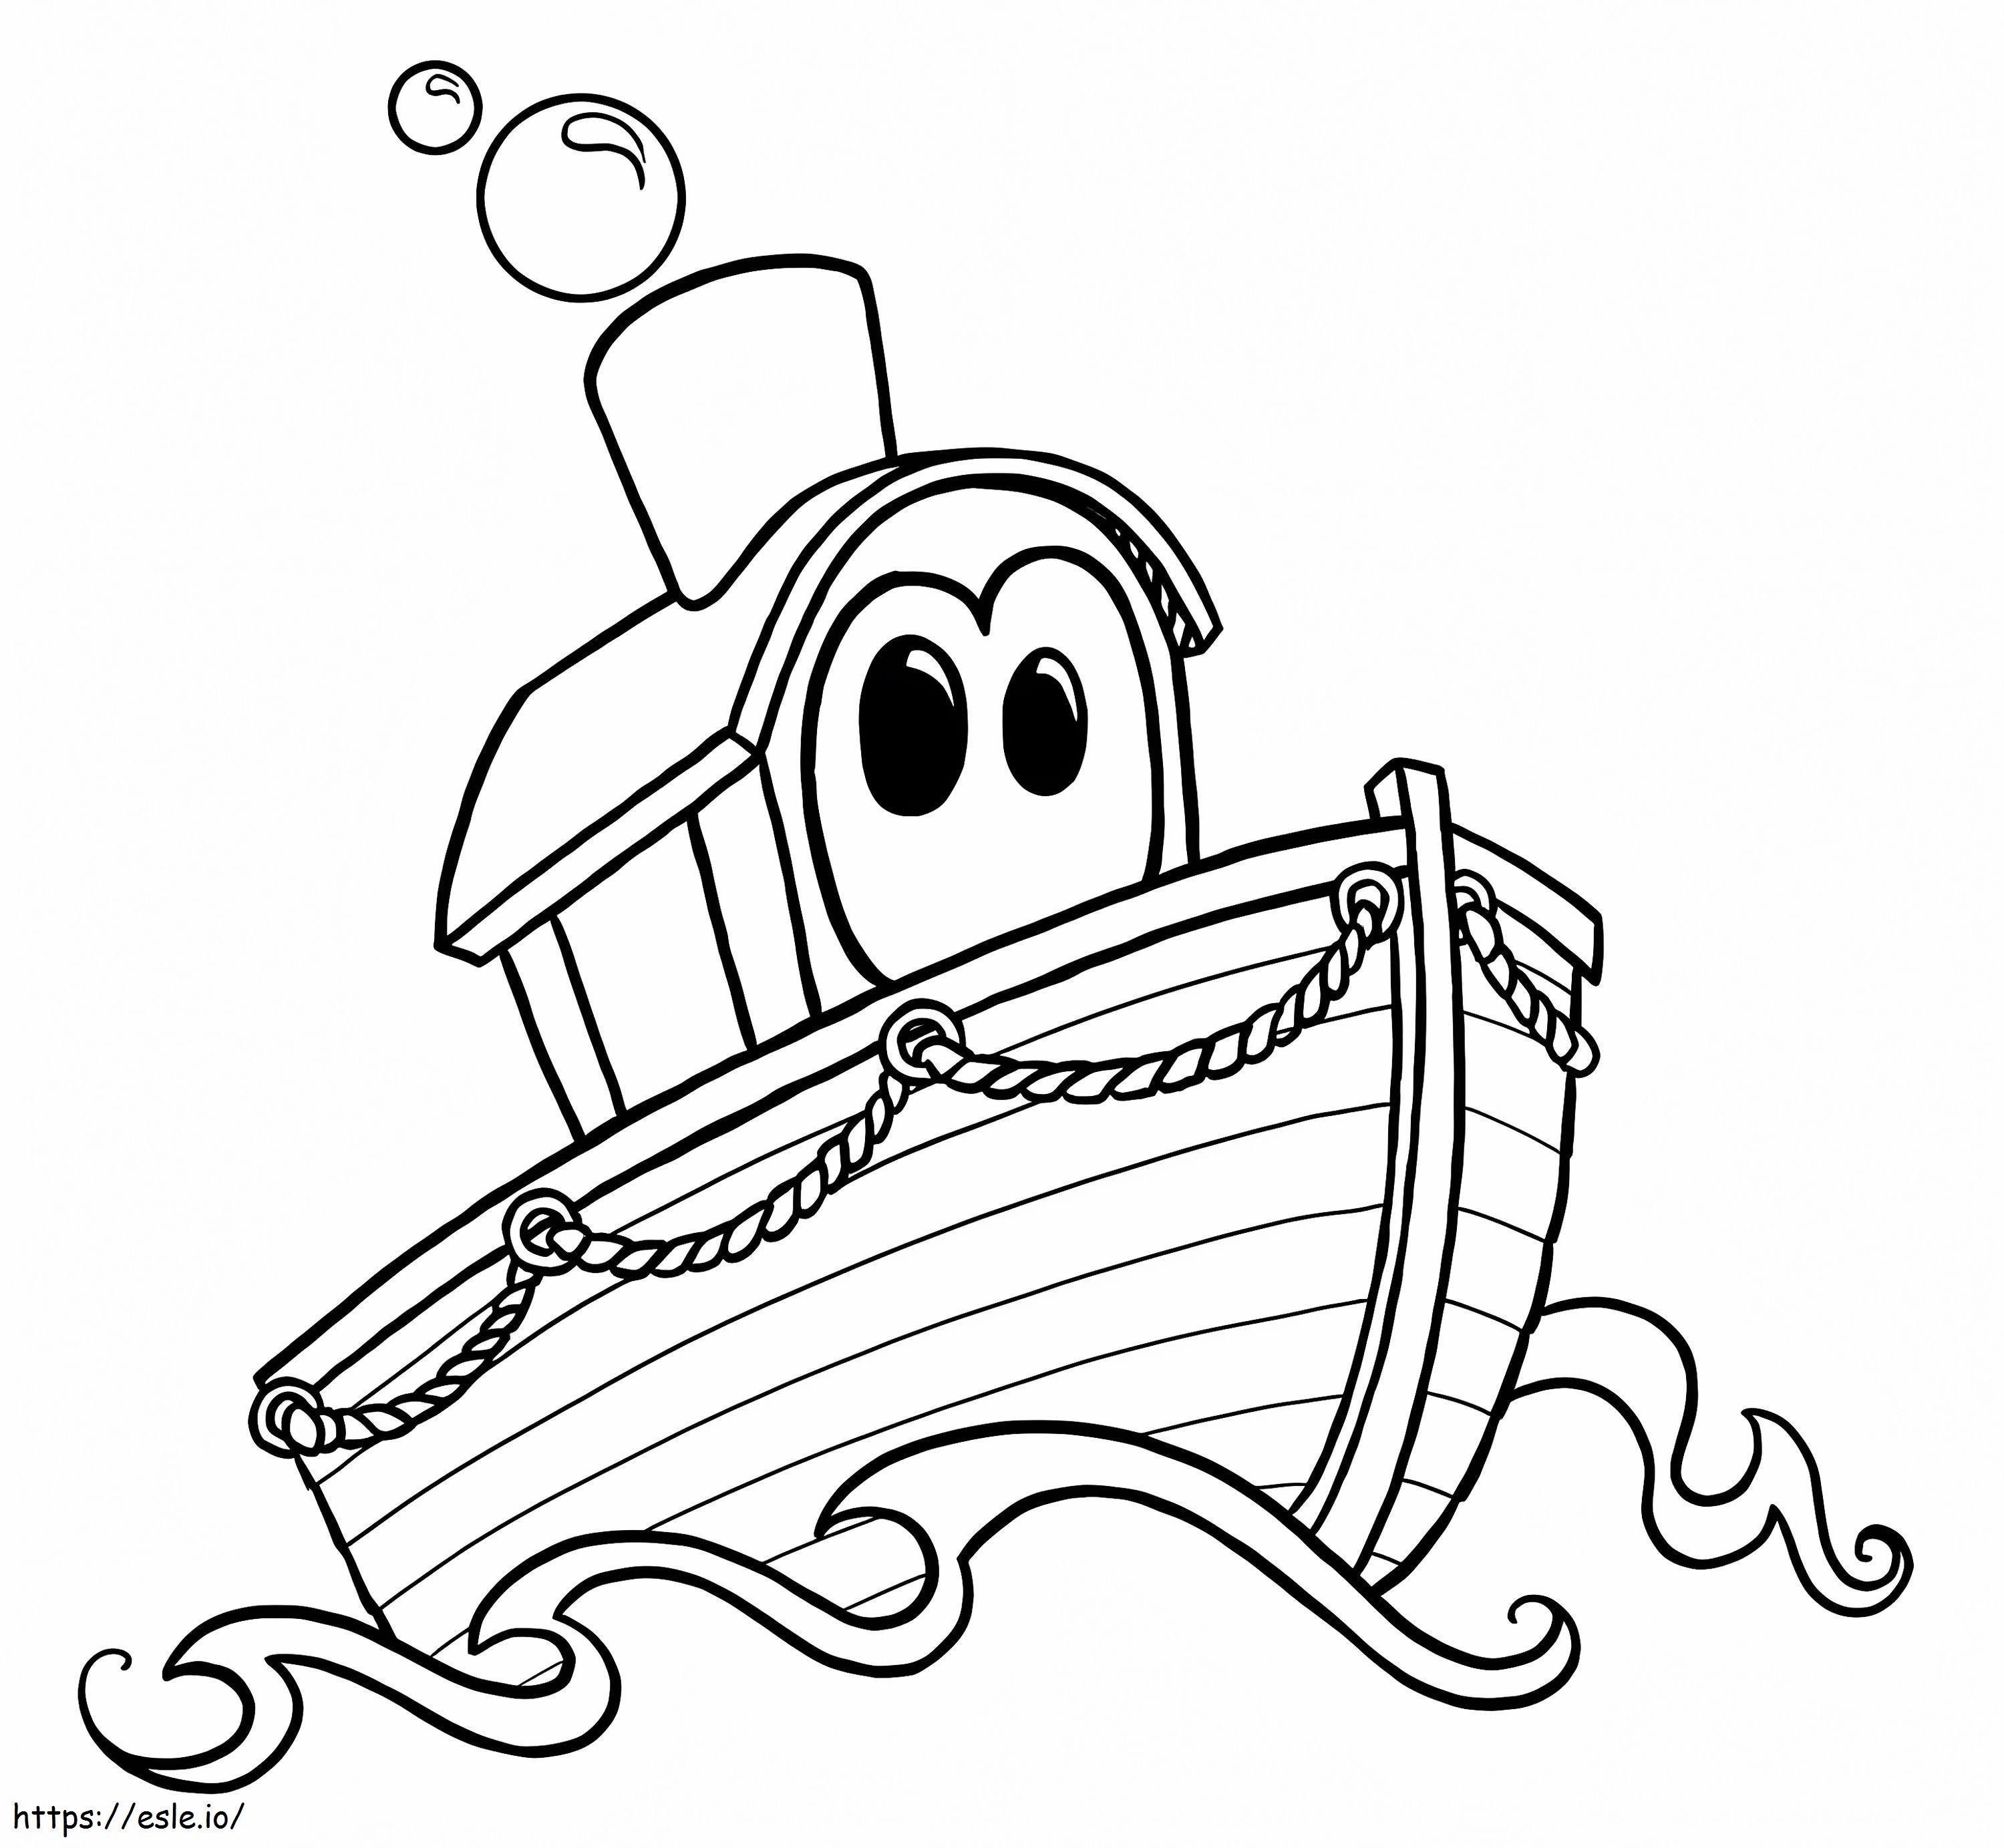 Adorable Boat coloring page